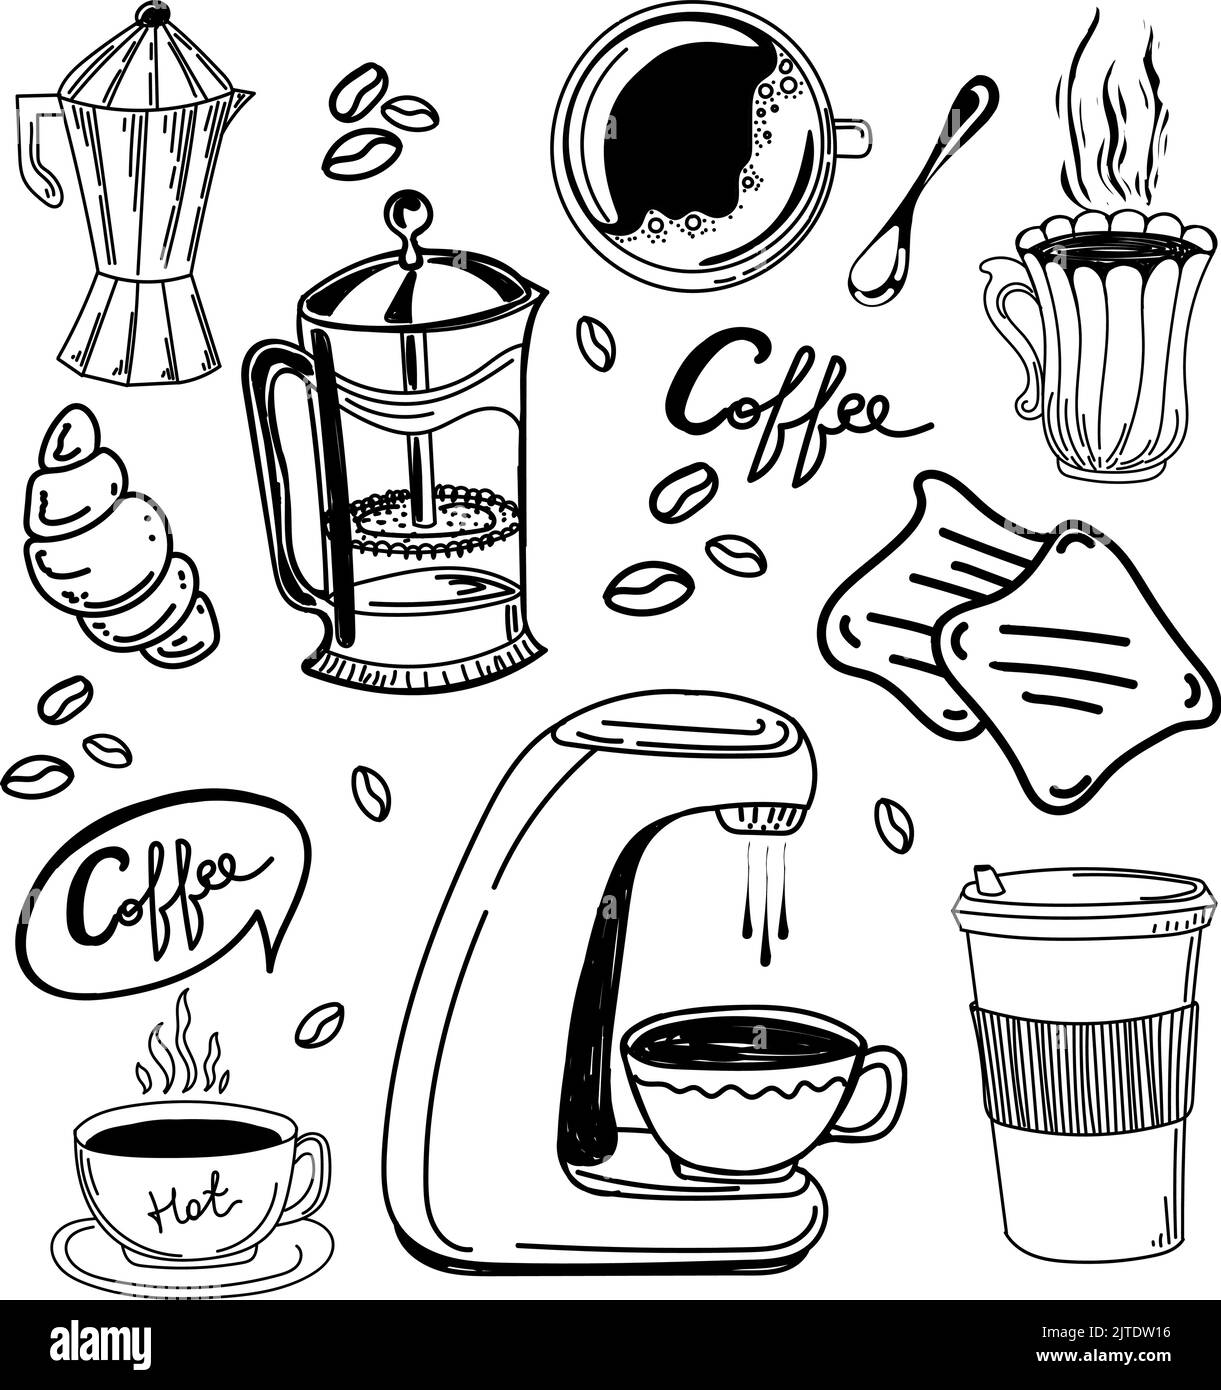 Barista Coffee Tools Set Sketch Style Doodles Grunge Background